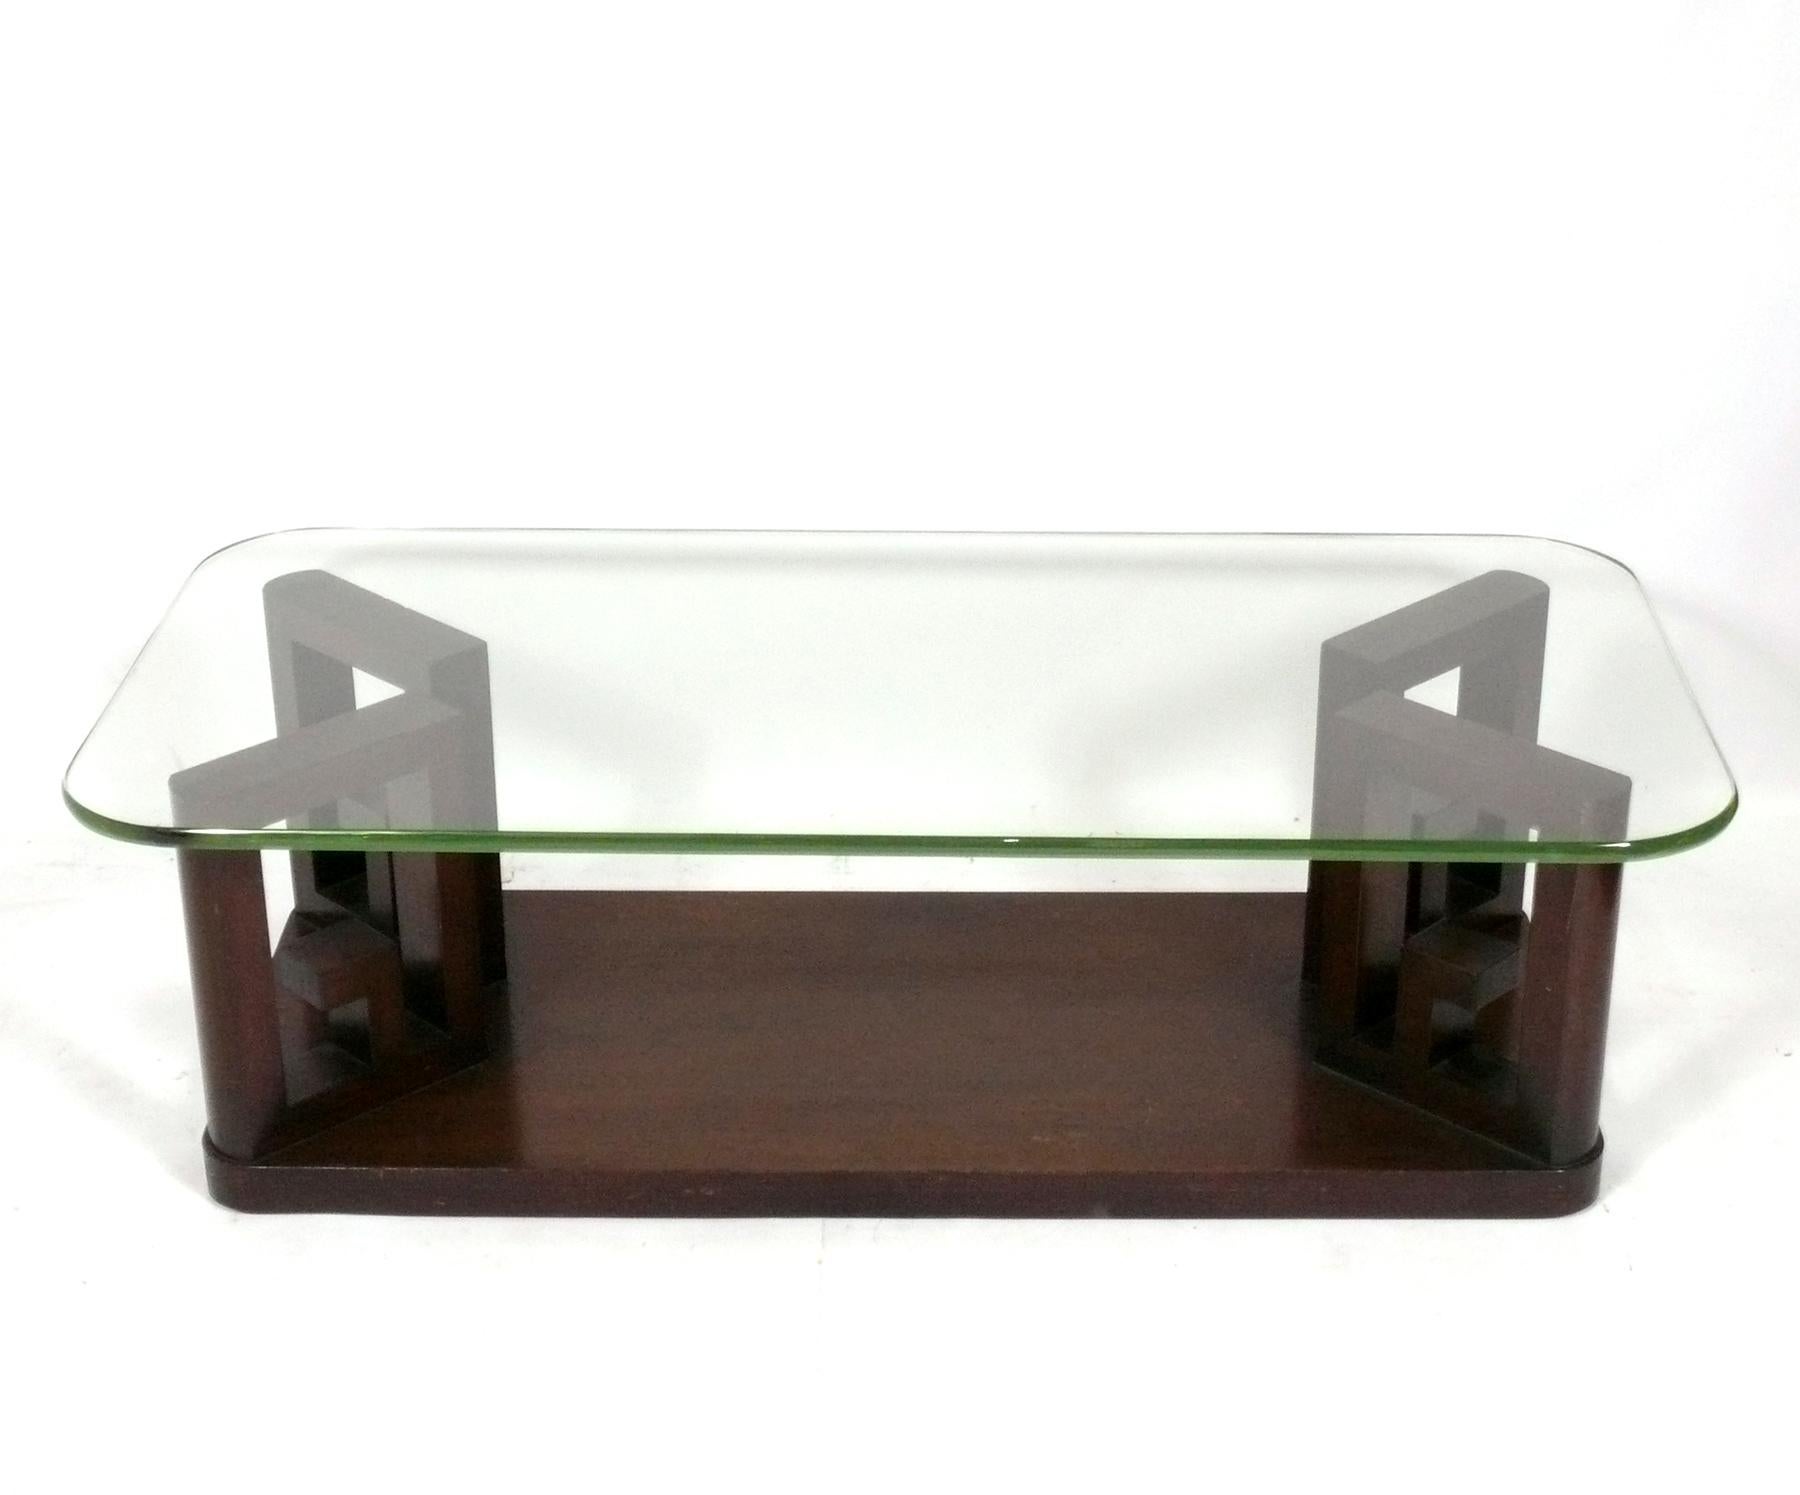 Sculptural Asian Influenced Greek Key Design Coffee Table, attributed to Paul Frankl, unsigned, American, circa 1940s. Retains it's original thick glass top in that beautiful Coke bottle green glass that they stopped making in the 1940s. This table